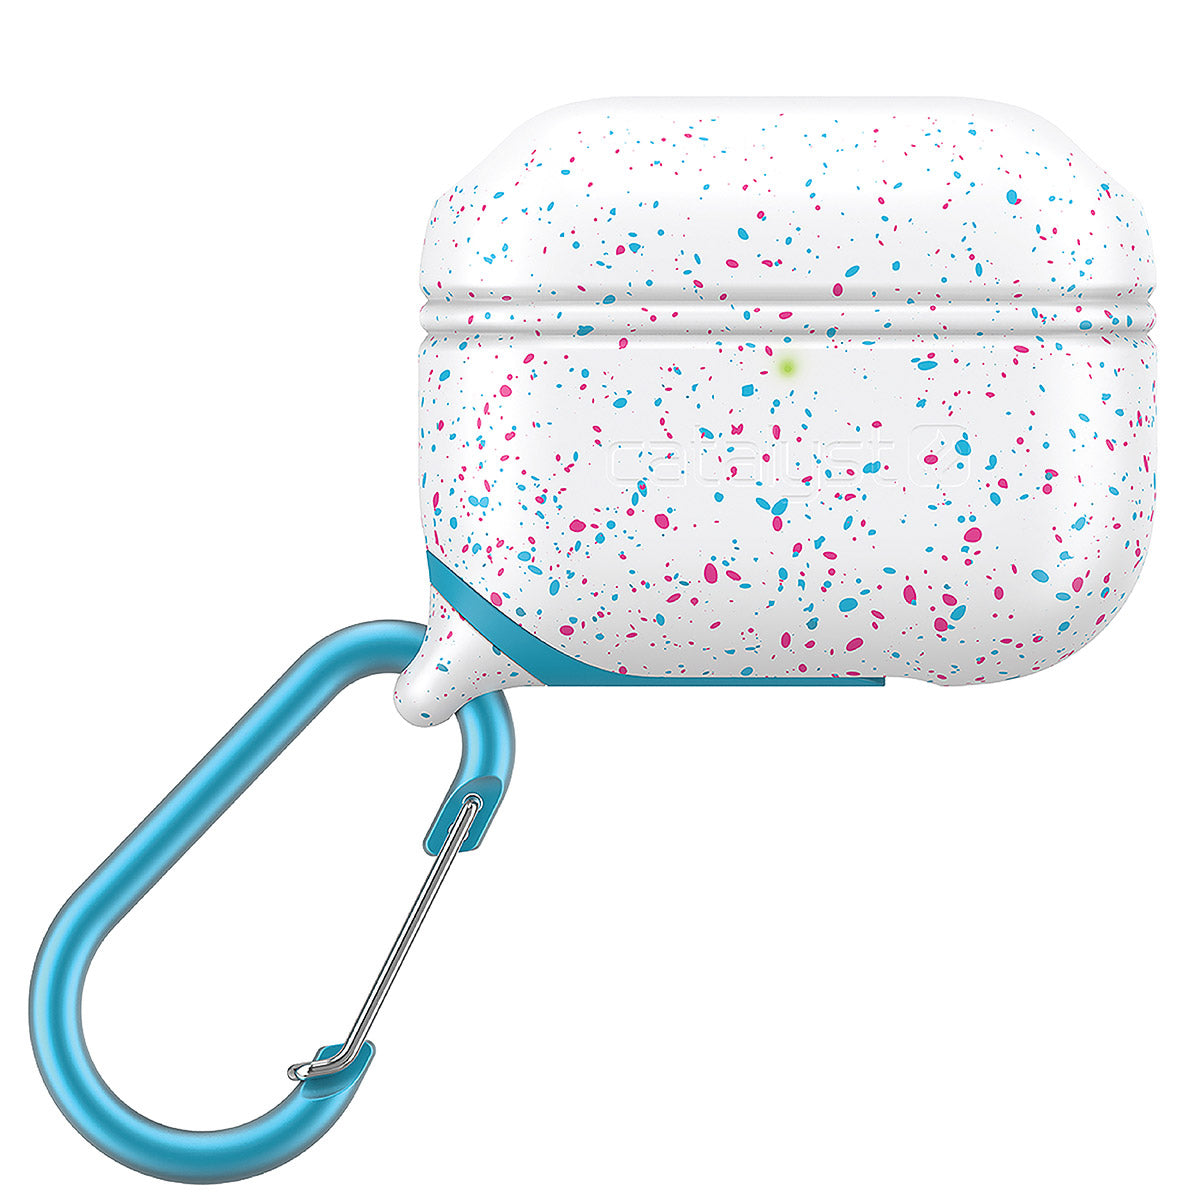 catalyst airpods pro gen 2 1 waterproof case carabiner special edition funfetti front view